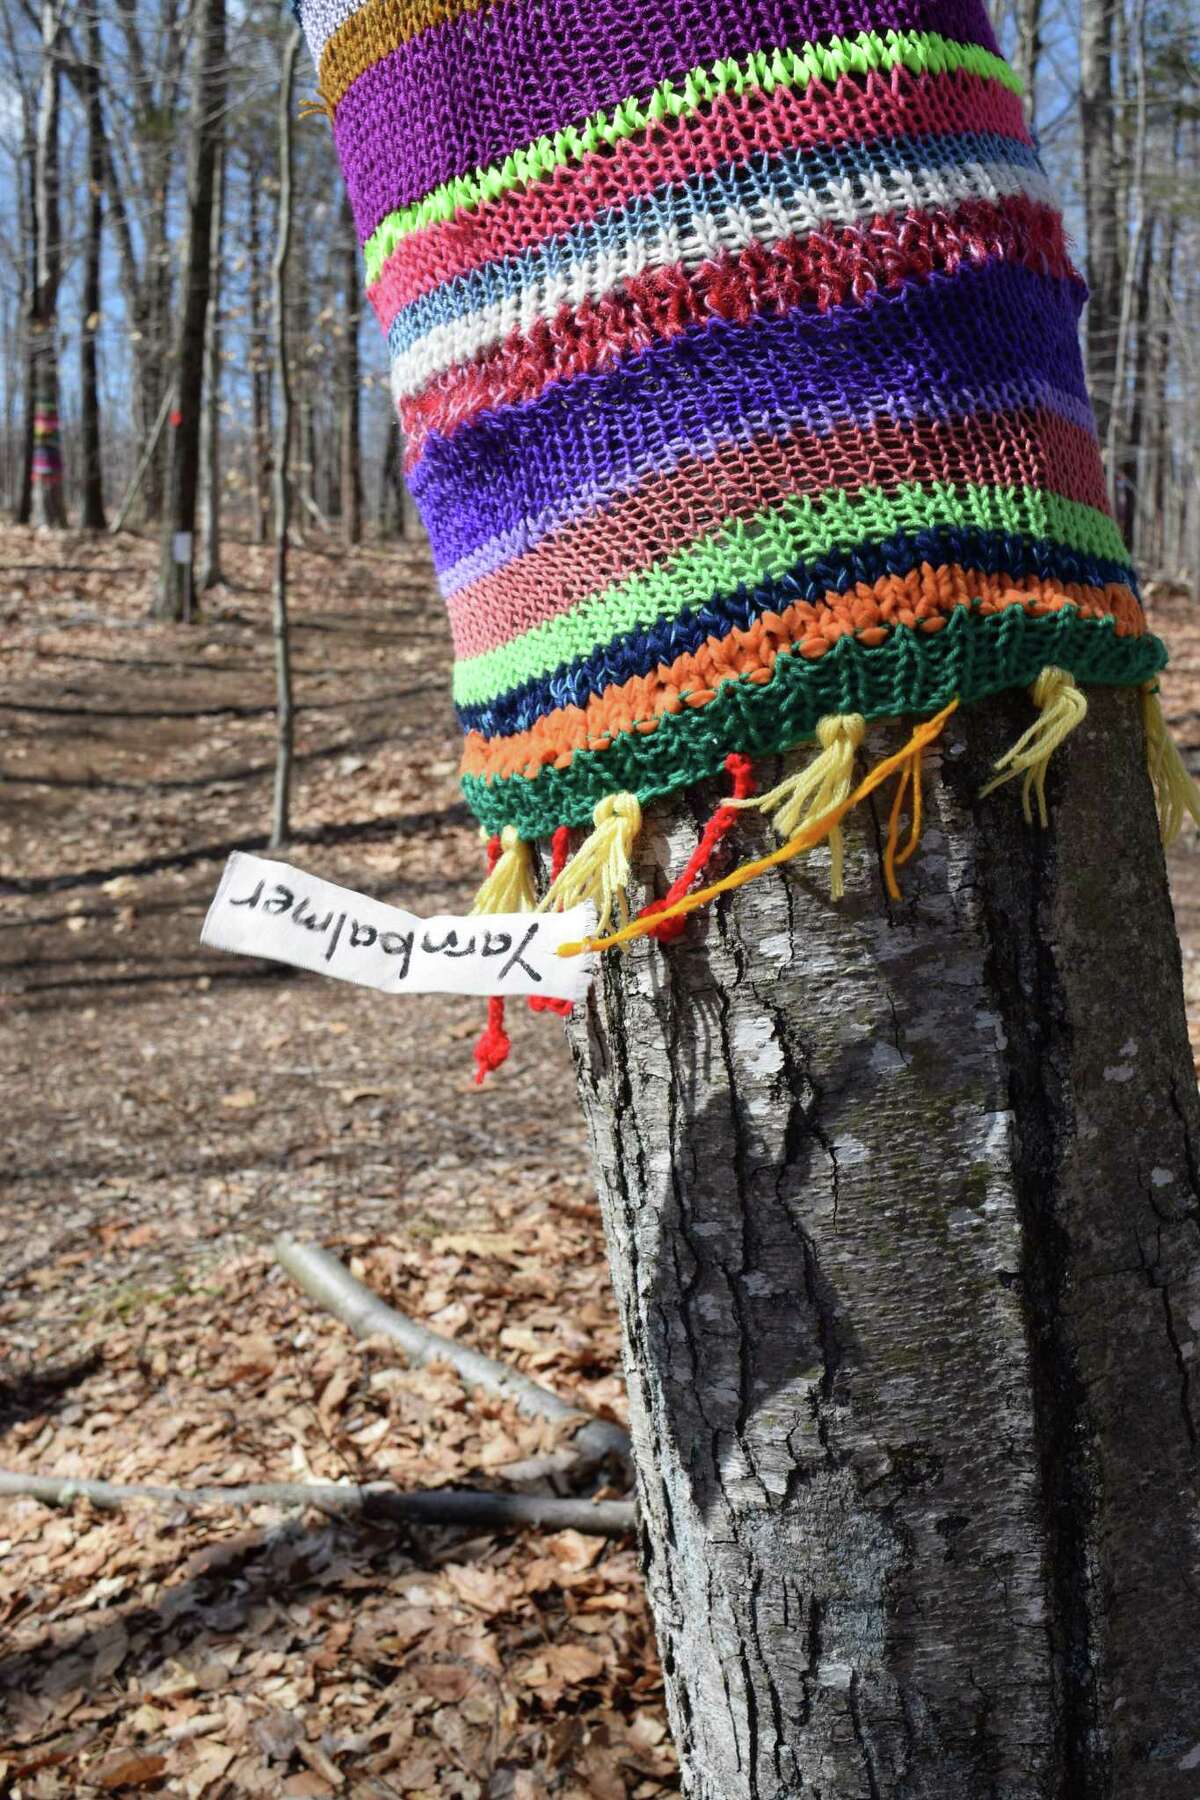 Beginning in April, hikers can expect a bit more decoration on the trees at the Woodcock Nature Center in Wilton. An artist known as “Yarnbalmer” has installed crocheted yarn art along a familiar section of trail at the center, at 54 Deer Run Road in Wilton.